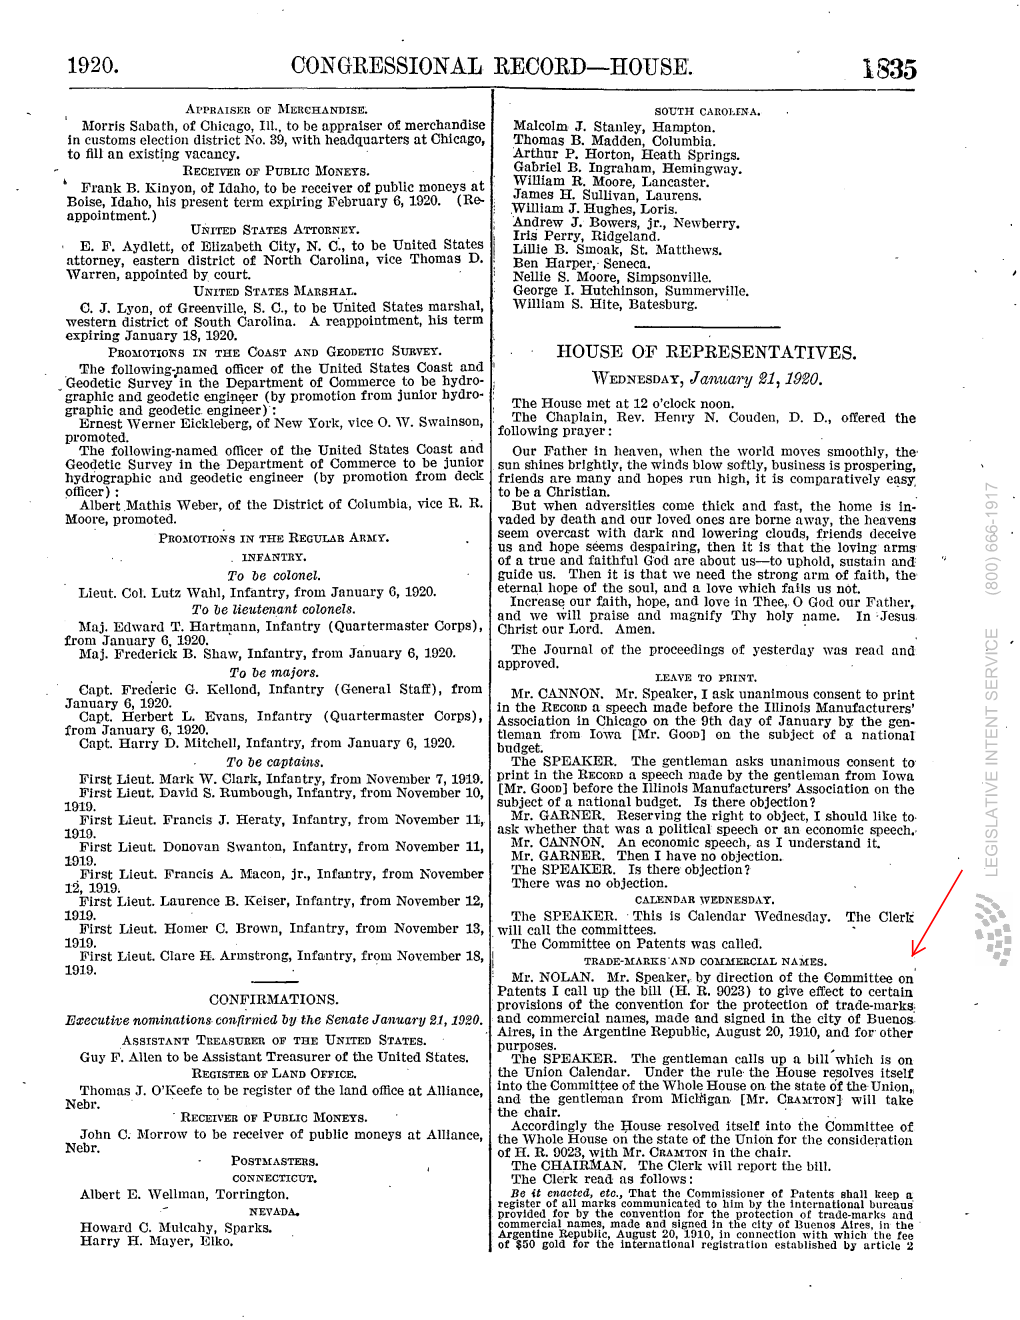 5. Excerpt Regarding H.R. 9023 from the Congressional Record Index, 66Th Congress As Follows